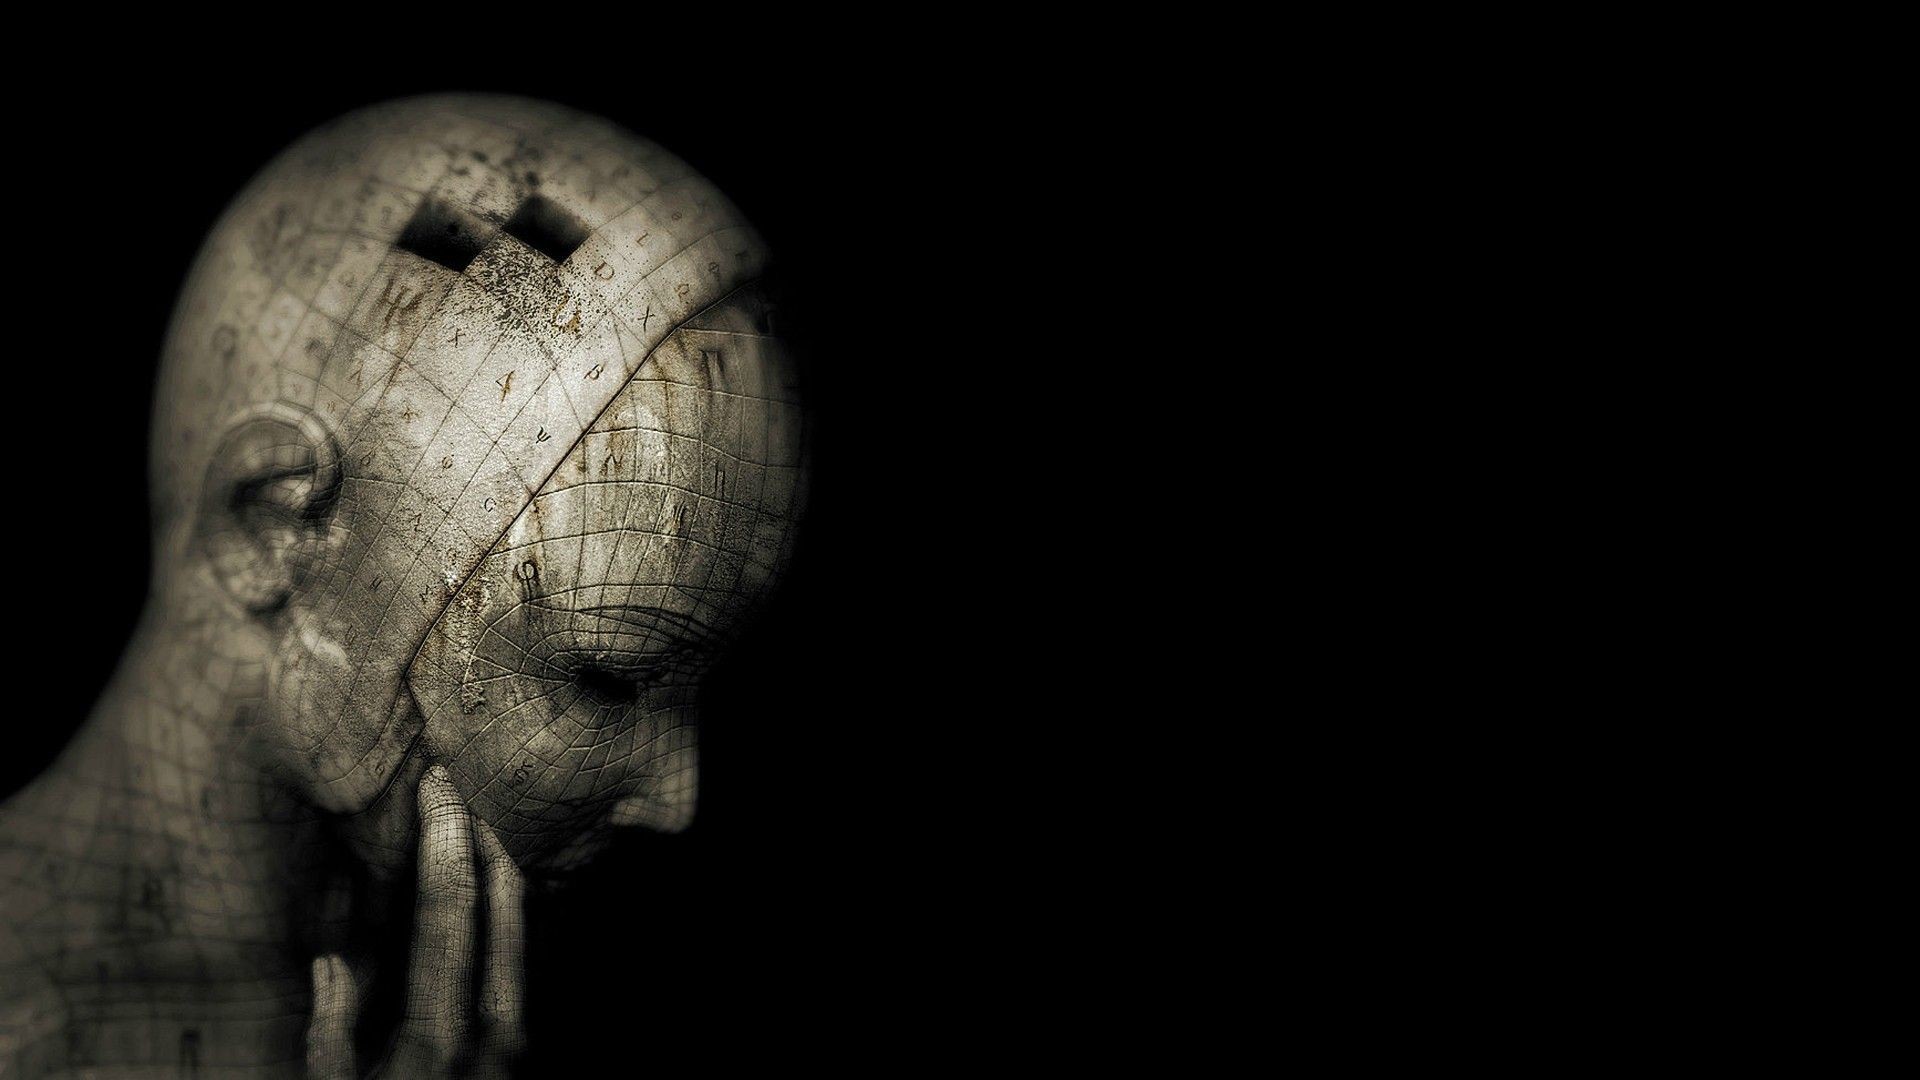 1920x1080 Head on a black background wallpapers and images - wallpapers .